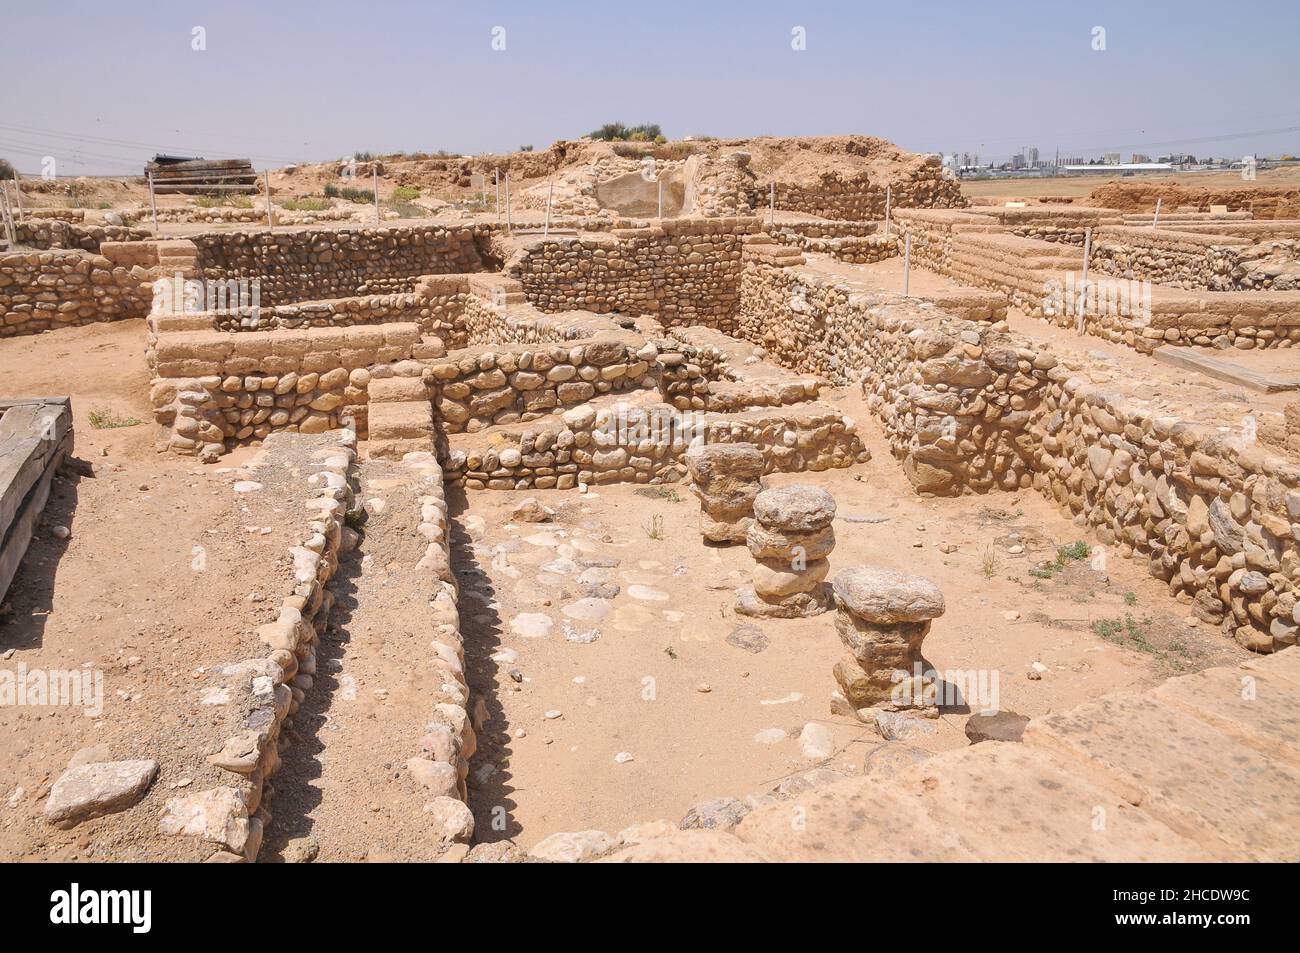 Israel, Negev, Tel Be'er Sheva believed to be the remains of the biblical town of Be'er Sheva. General view Stock Photo